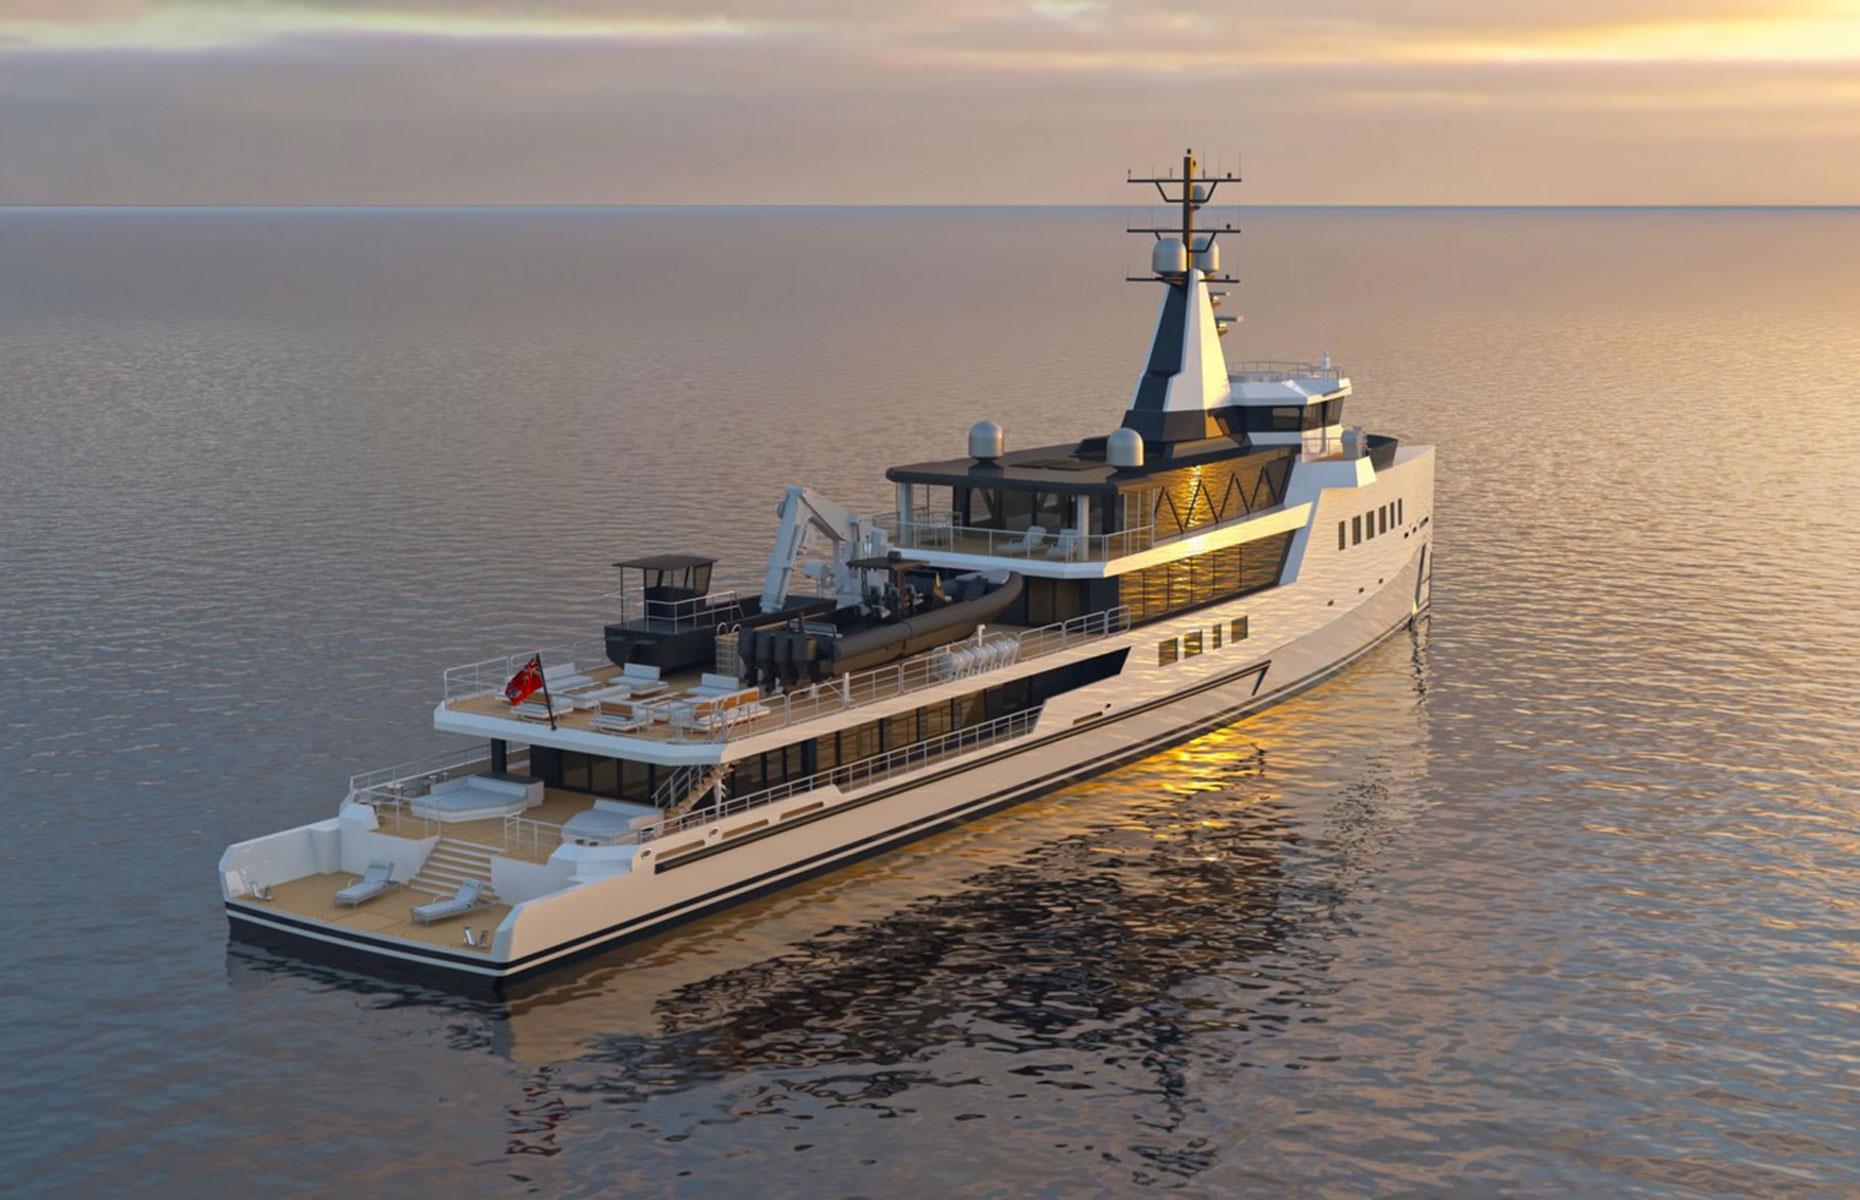 <p>Designed by innovative London studio Michael Leach Design and engineered in-house, the 247-foot (75.2m)<em> Custom YS 75 Hybrid</em> has cutting-edge features, including a touch-and-go helipad and a crane for deploying tenders.</p>  <p>It can accommodate 24 crew members and up to 12 guests across six staterooms and boasts plush entertaining areas.</p>  <p>Due to launch early this year, the innovative vessel will also be the first private superyacht equipped with commercial-grade cultivation pods to grow vegetables, further adding to its eco credentials. As for the price tag? Damen is keeping it firmly under wraps...</p>